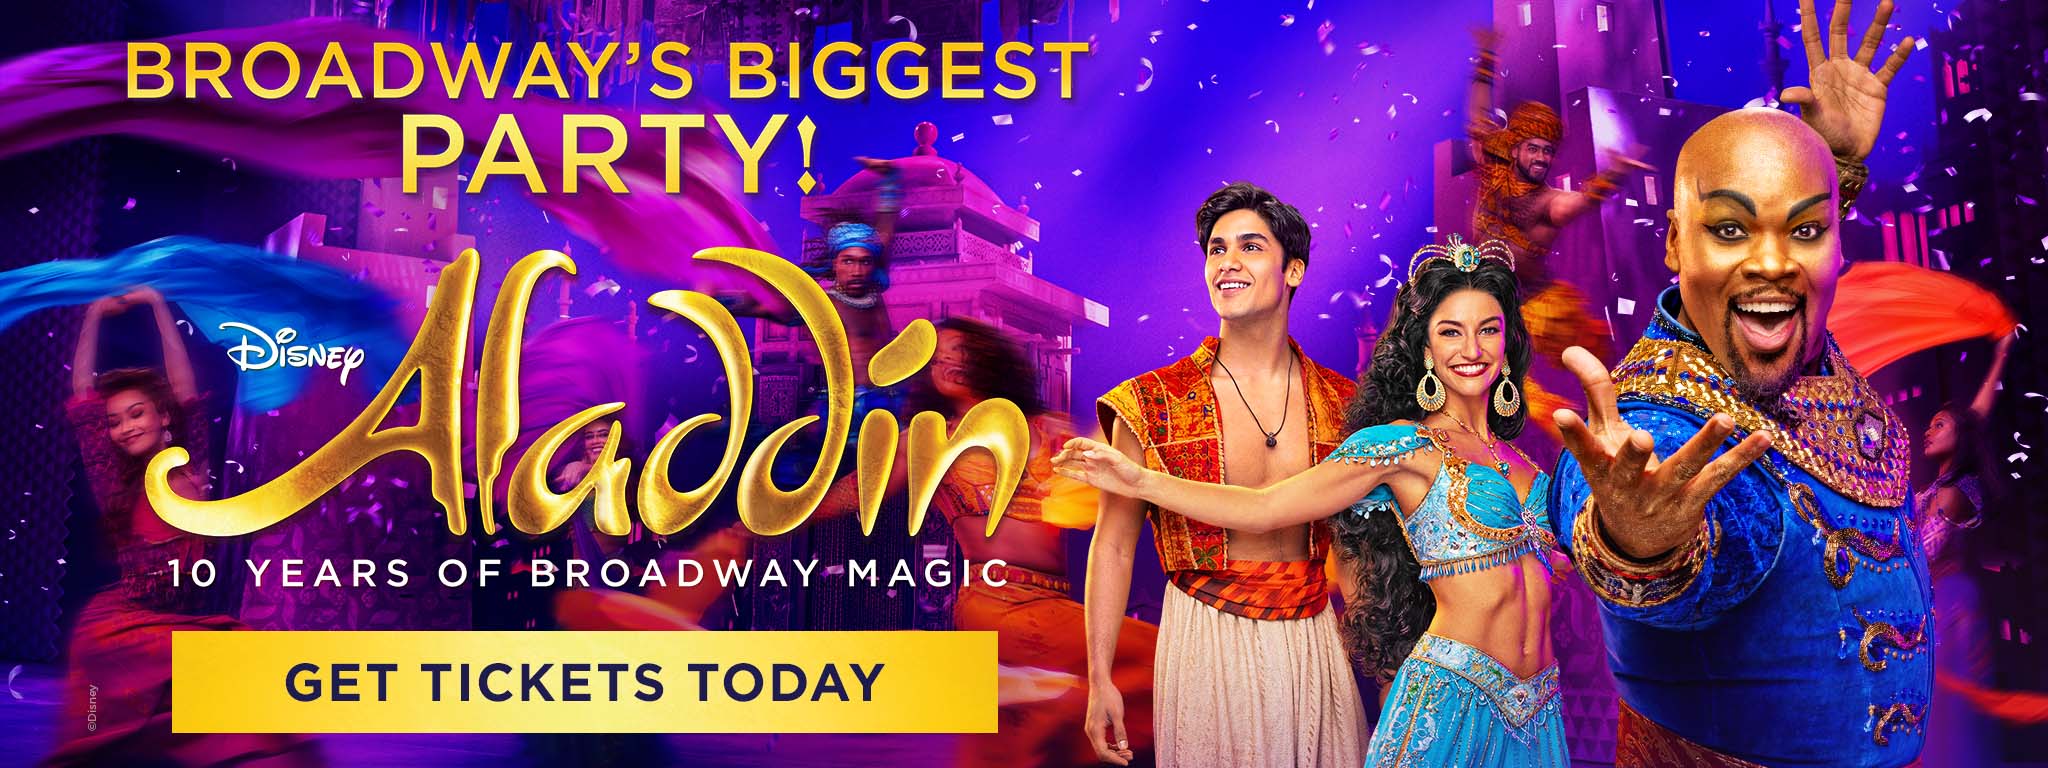 Disney ALADDIN - Broadway's Biggest Party! - Get Tickets Today